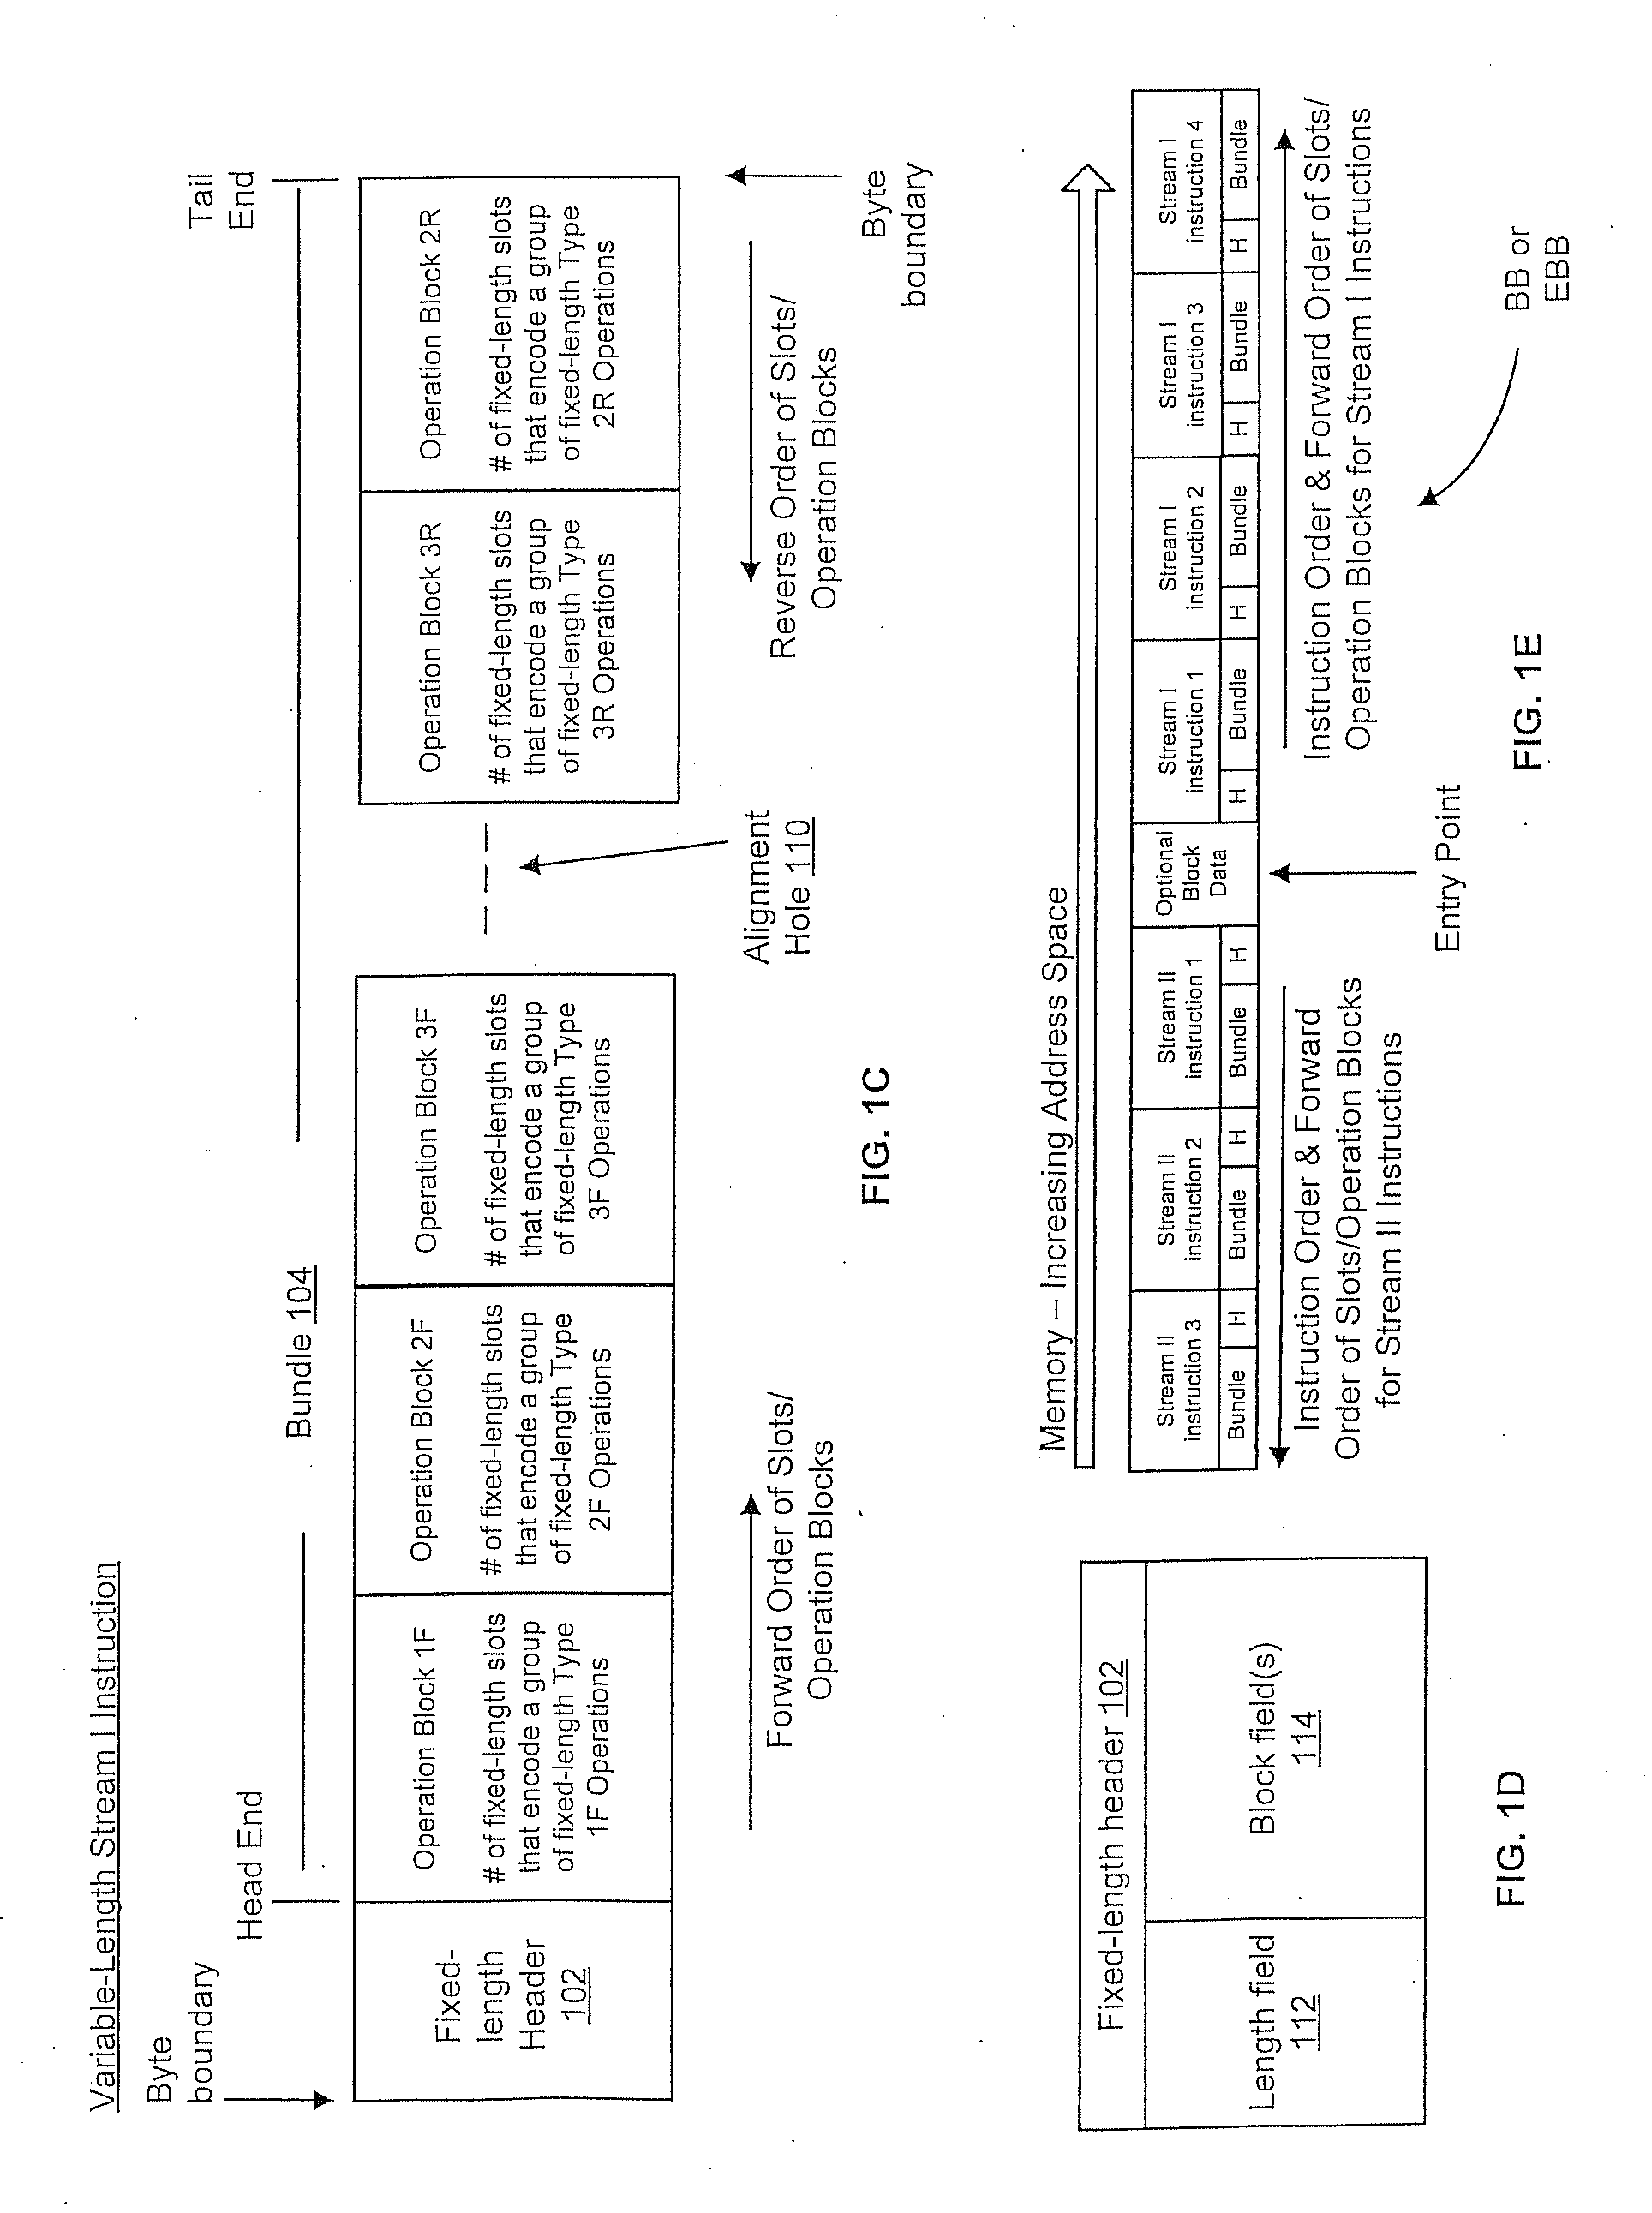 Computer processor employing instructions with elided nop operations